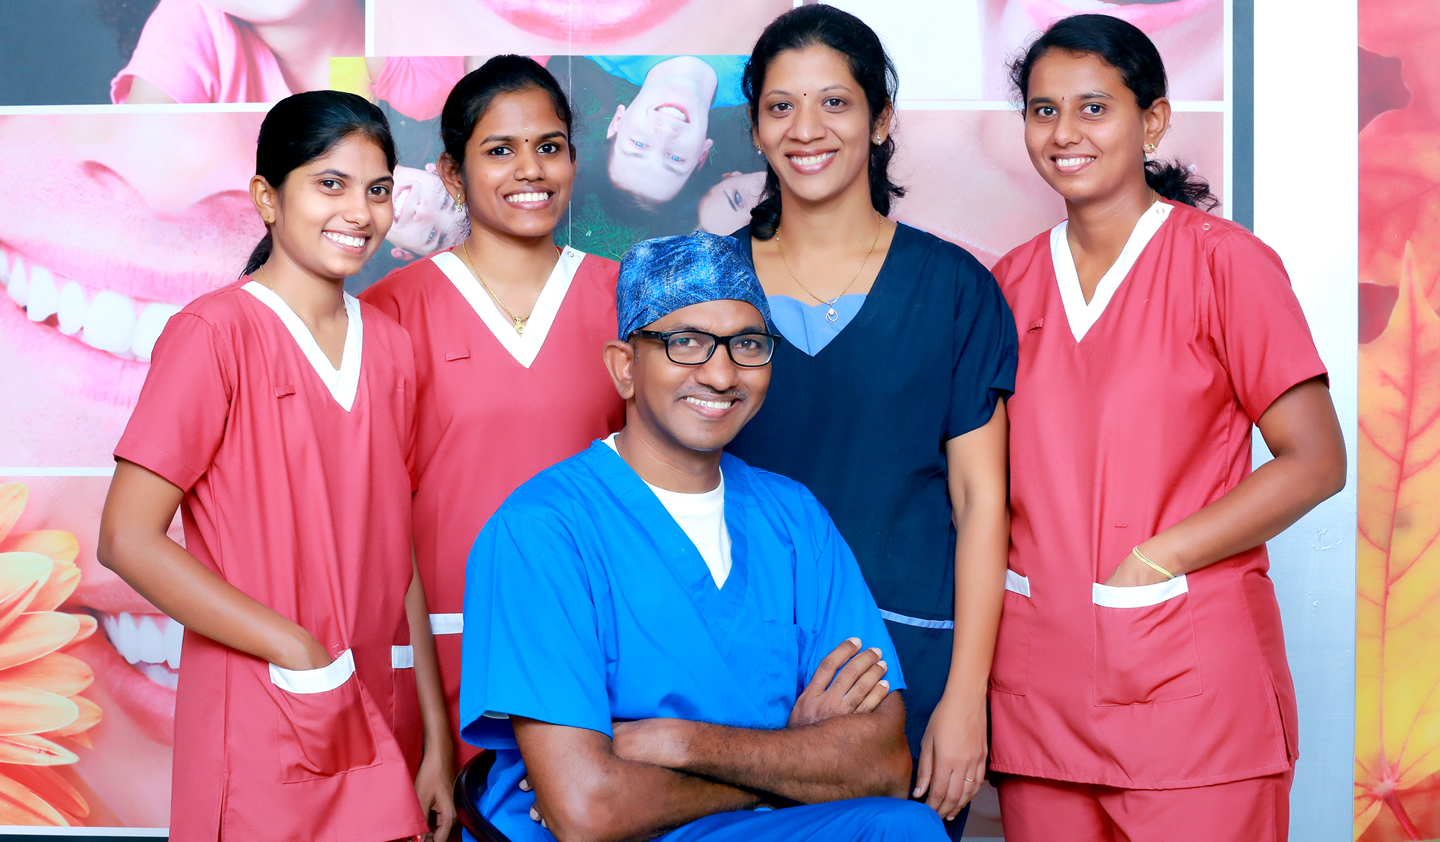 Dentist in Coimbatore, Dental Clinic in Coimbatore, Best Dental Hospital in Coimbatore